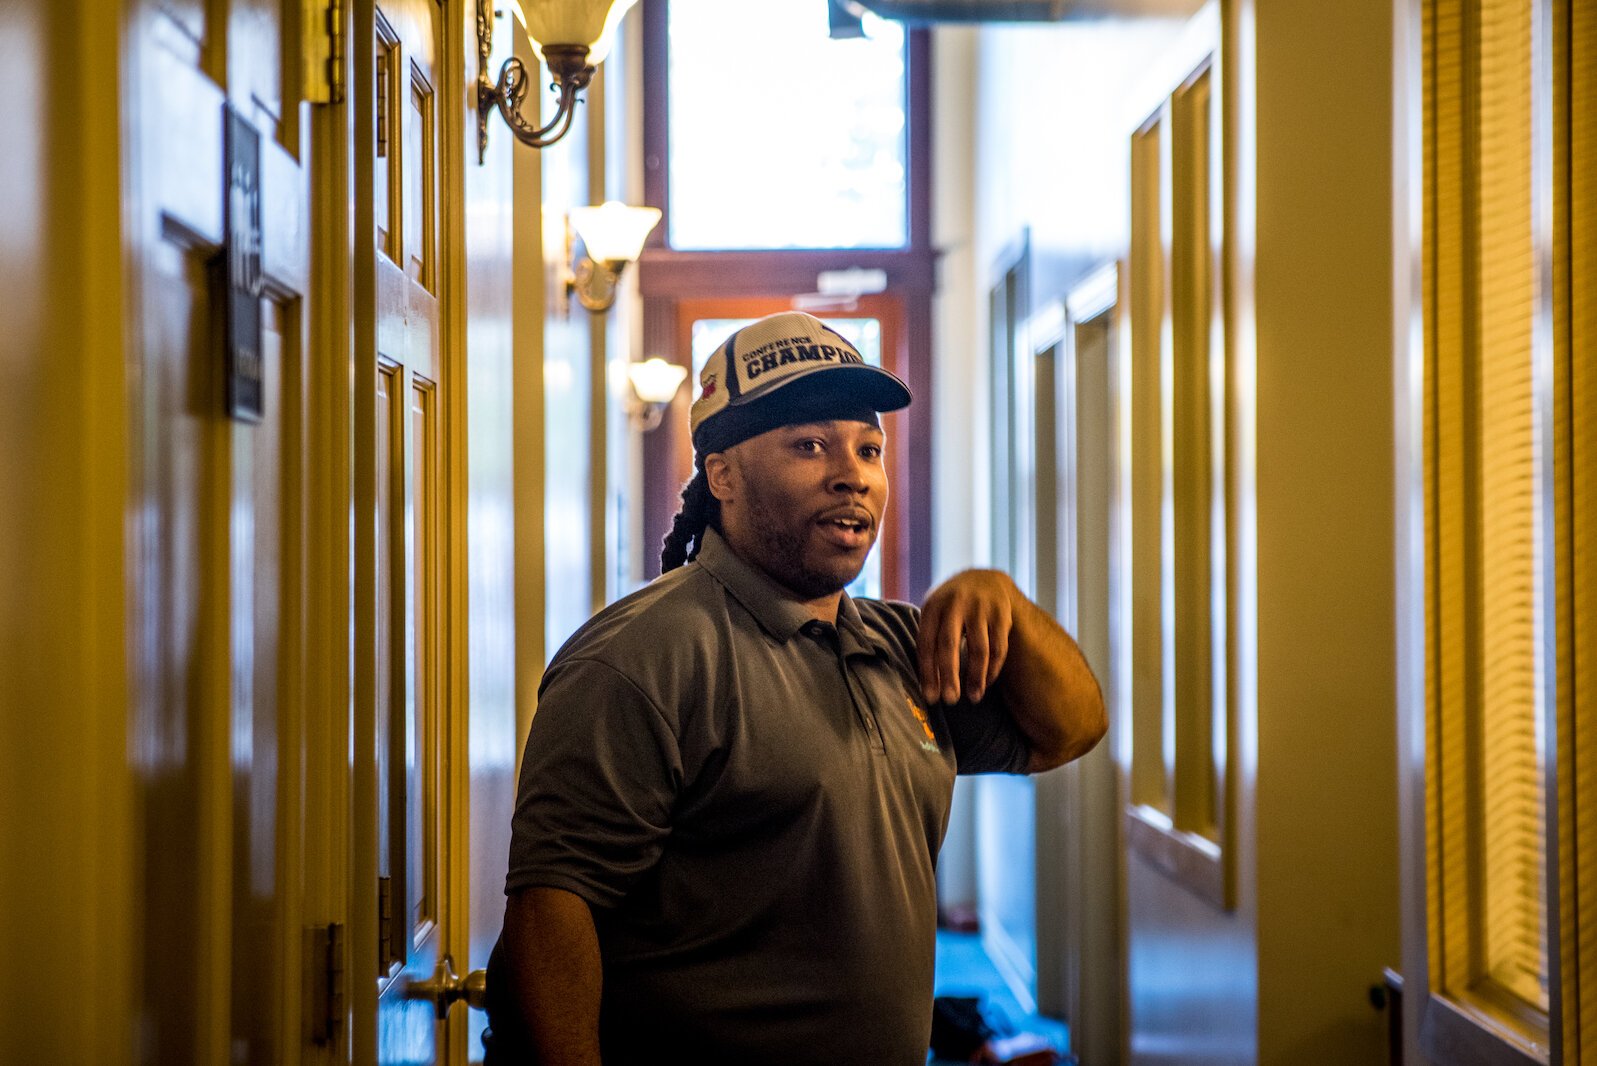 Roosevelt Lee-Fleming stands in the hallway of some of the space used by The Drip Sneakers at 315 N. Burdick St. in downtown Kalamazoo.